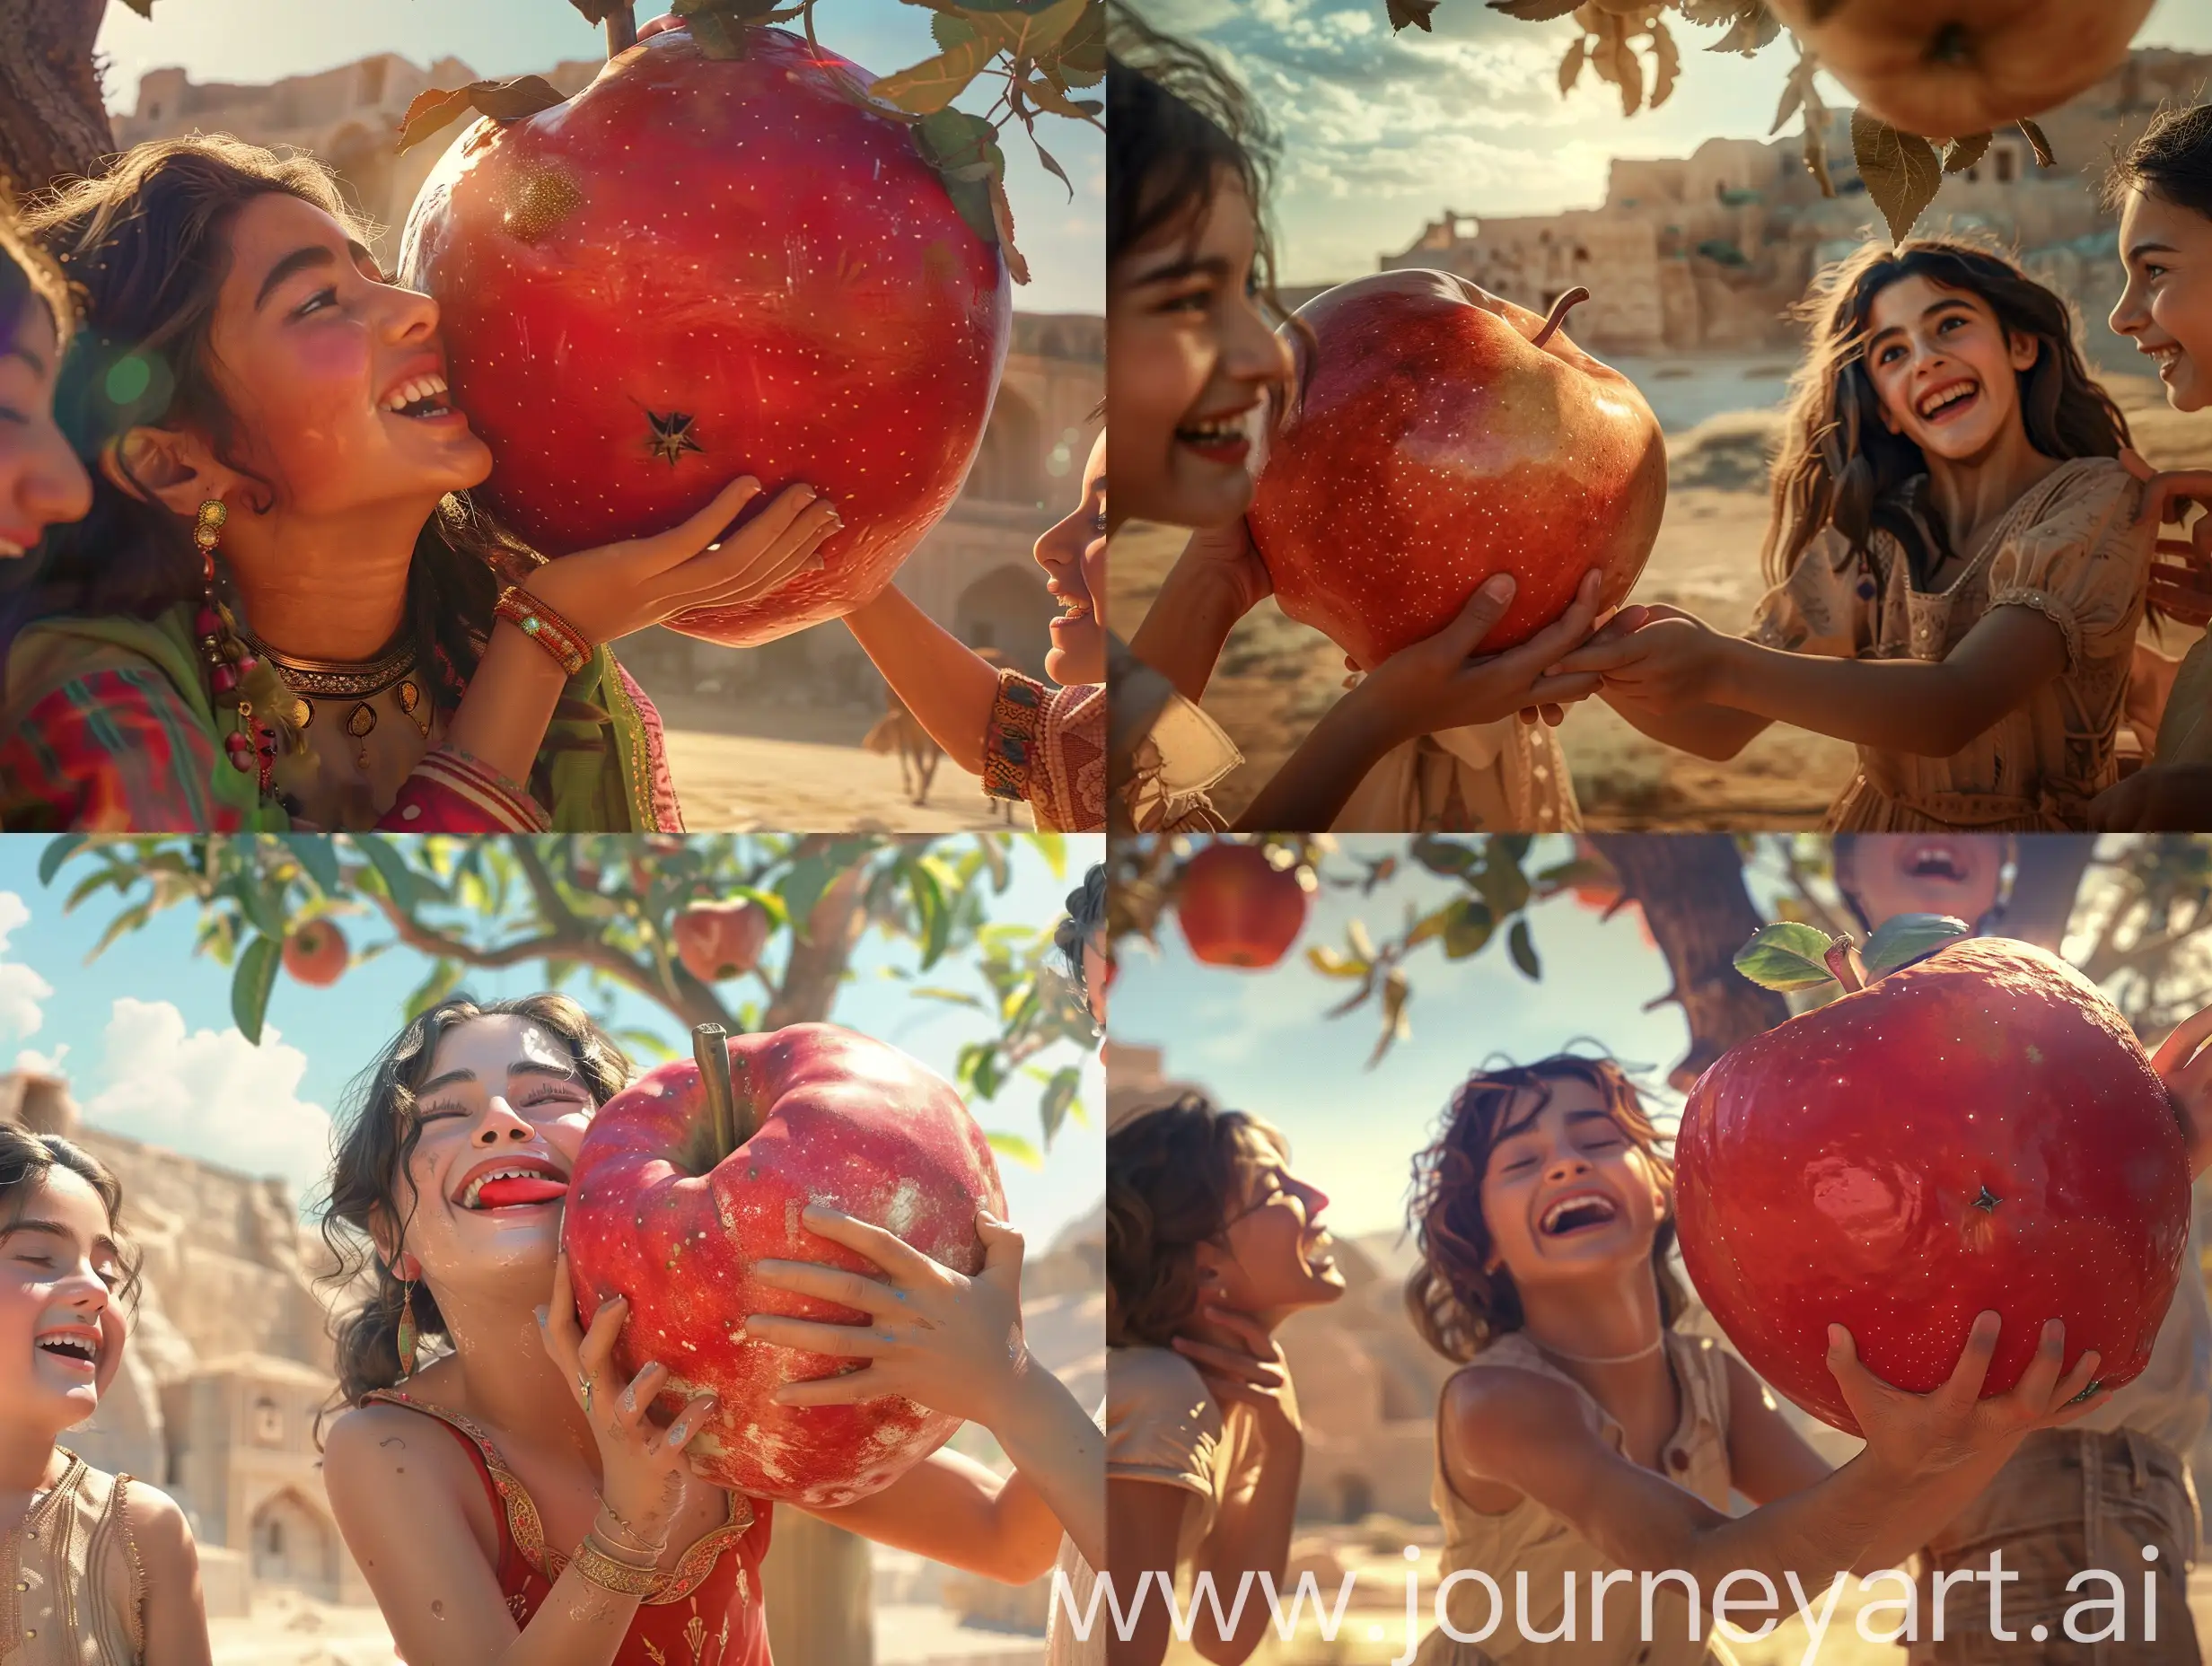 A beautiful smiling Persian girl is holding a big red apple the size of a watermelon as she is about to bite into it and her friends are teasing her, they are outside the Bam citadel under a giant apple tree in a desert, in an ancient civilization, cinematic, epic realism,8K, highly detailed, backlit, glamour lighting